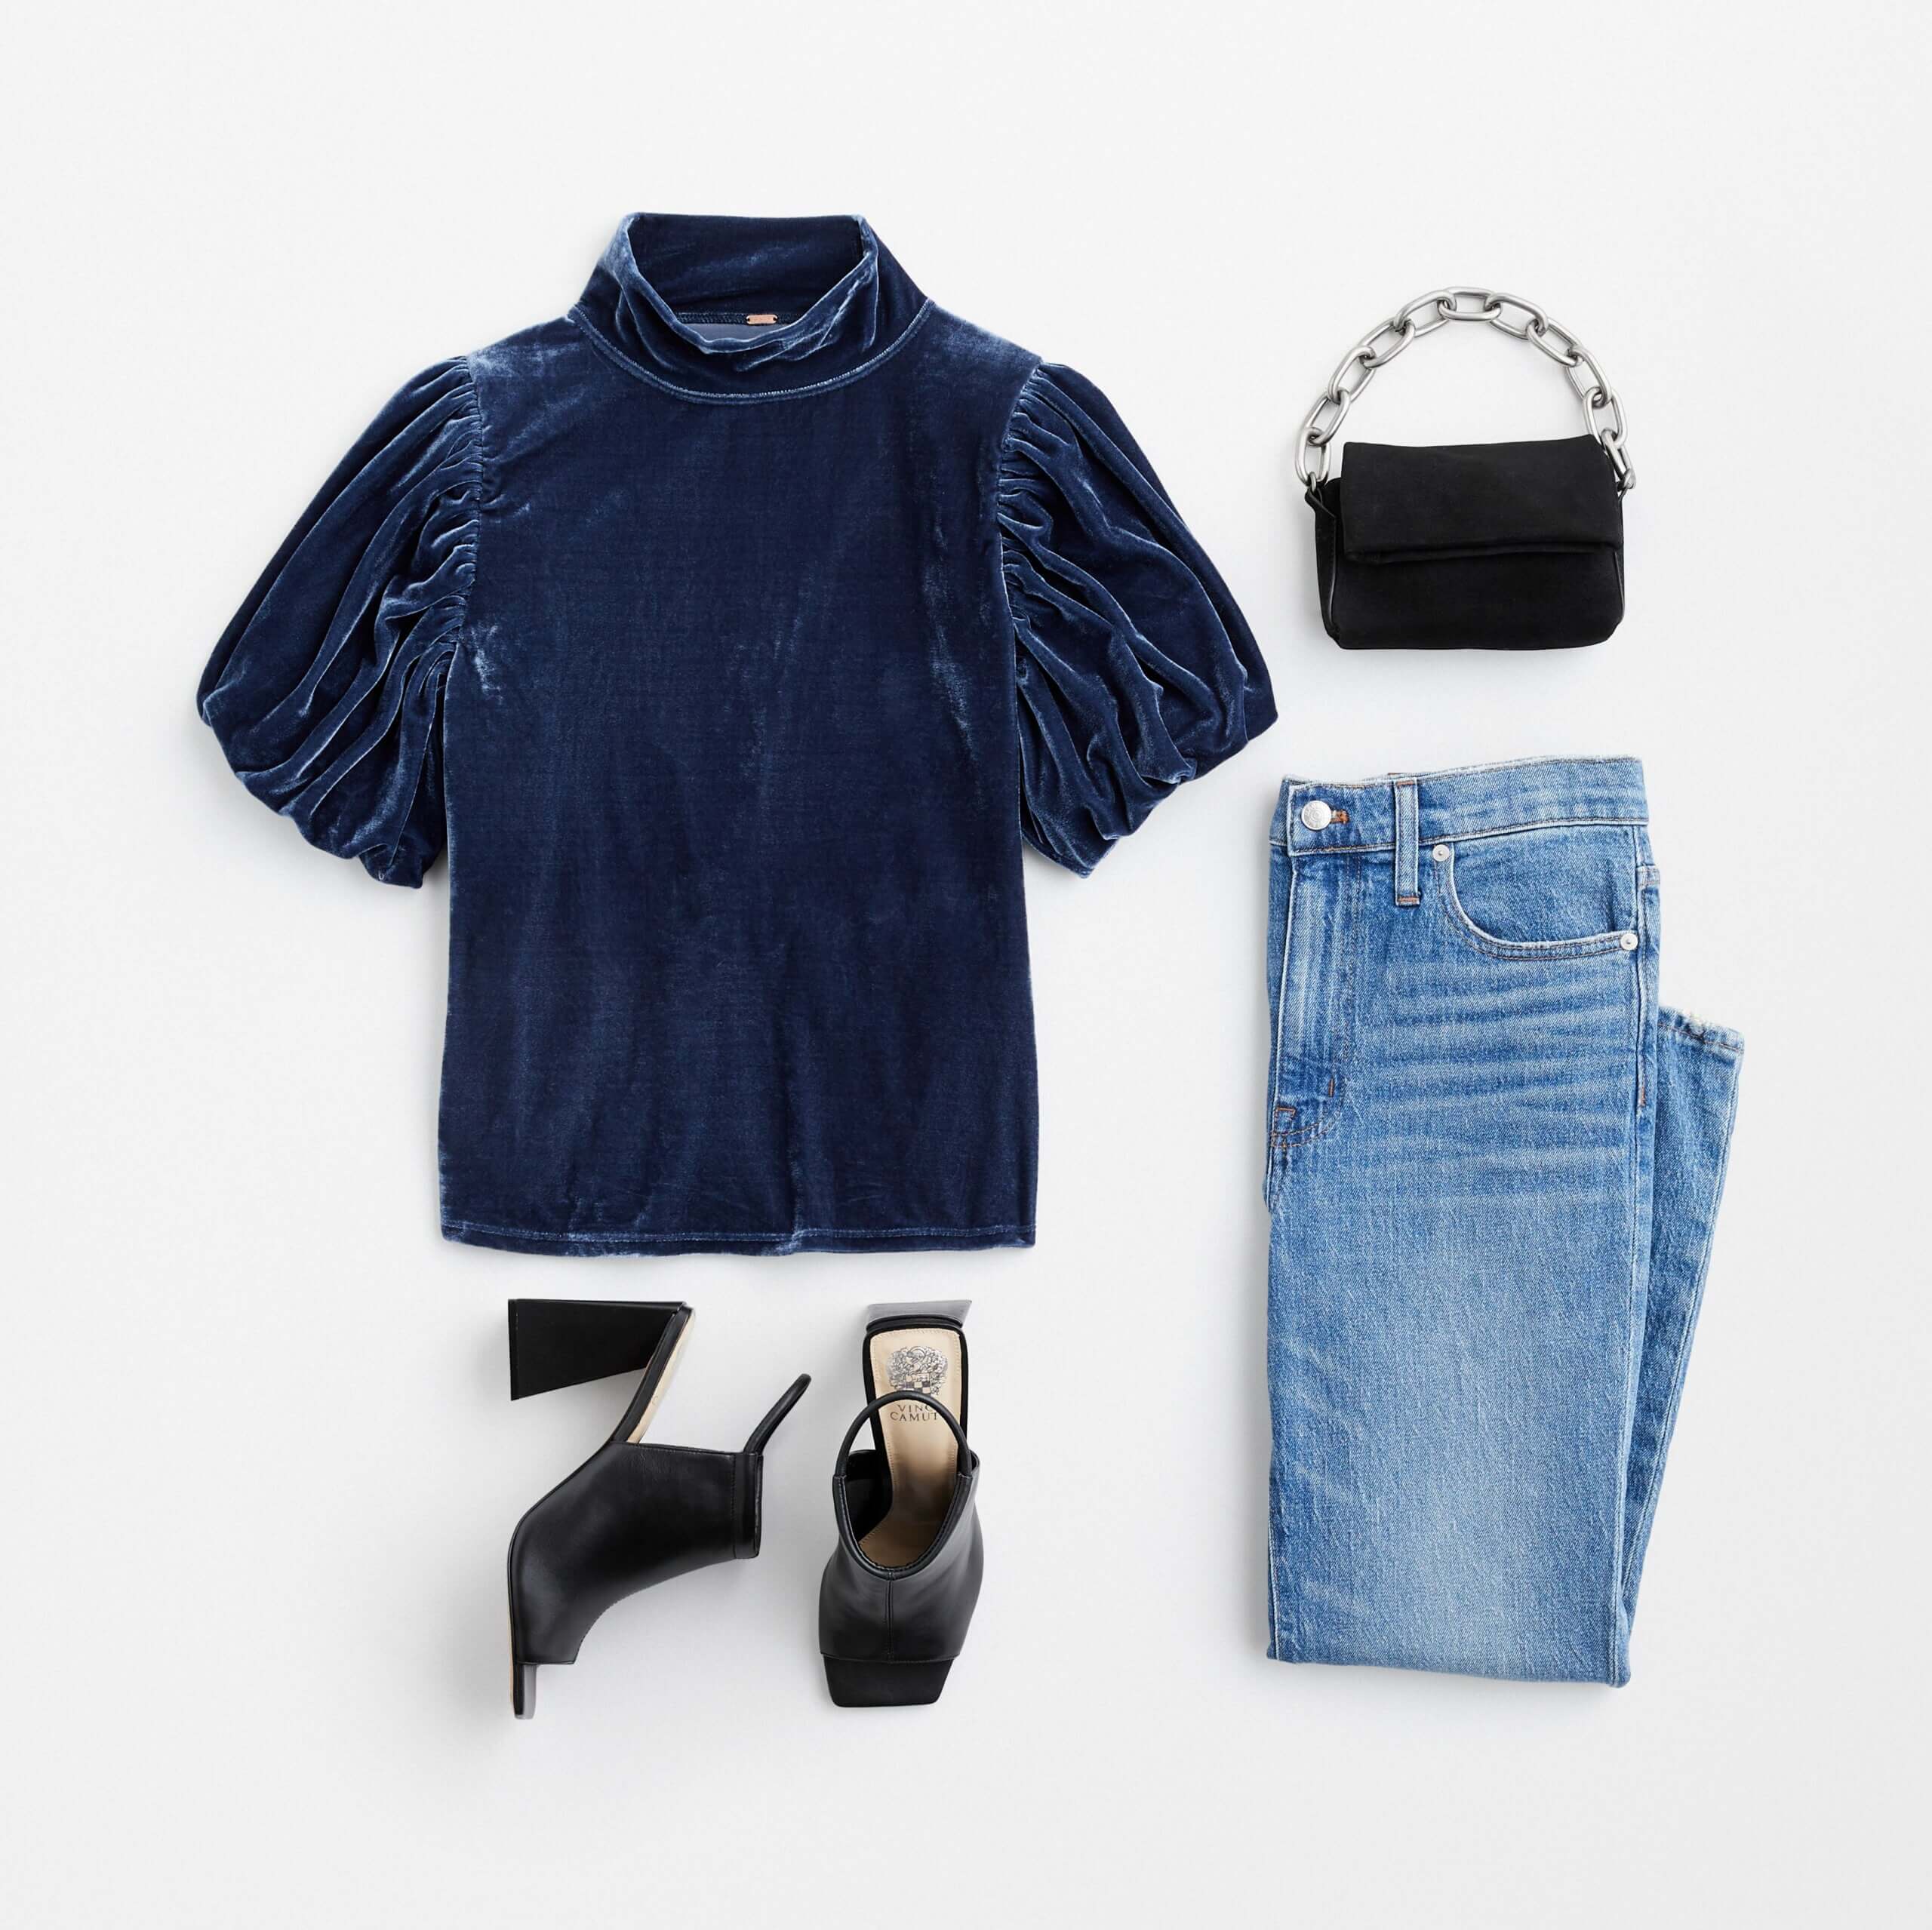 Stitch Fix women's outfit laydown featuring royal blue velvet shirt, blue jeans, black heeled sandals and black purse. 